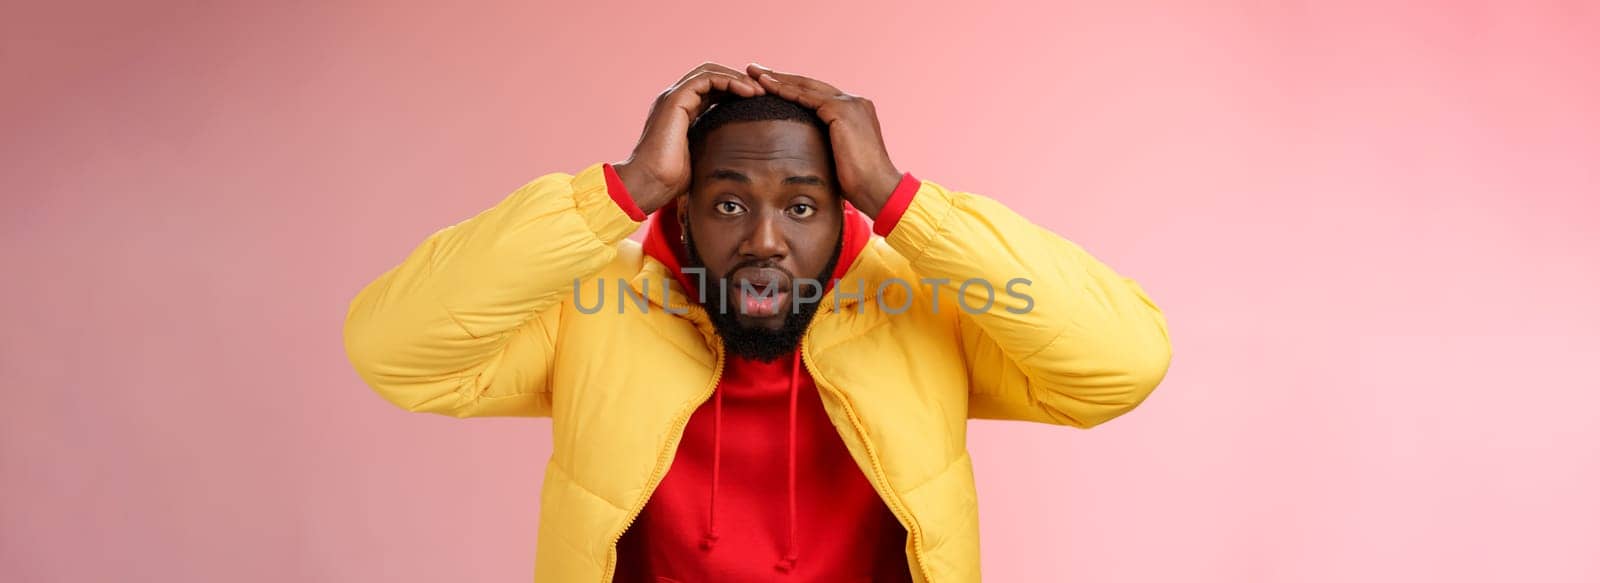 Shocked stupefied young african-american bearded man grab head drop jaw gasping confused frustrated looking upset troubled have problems standing stunned concerned pink background by Benzoix